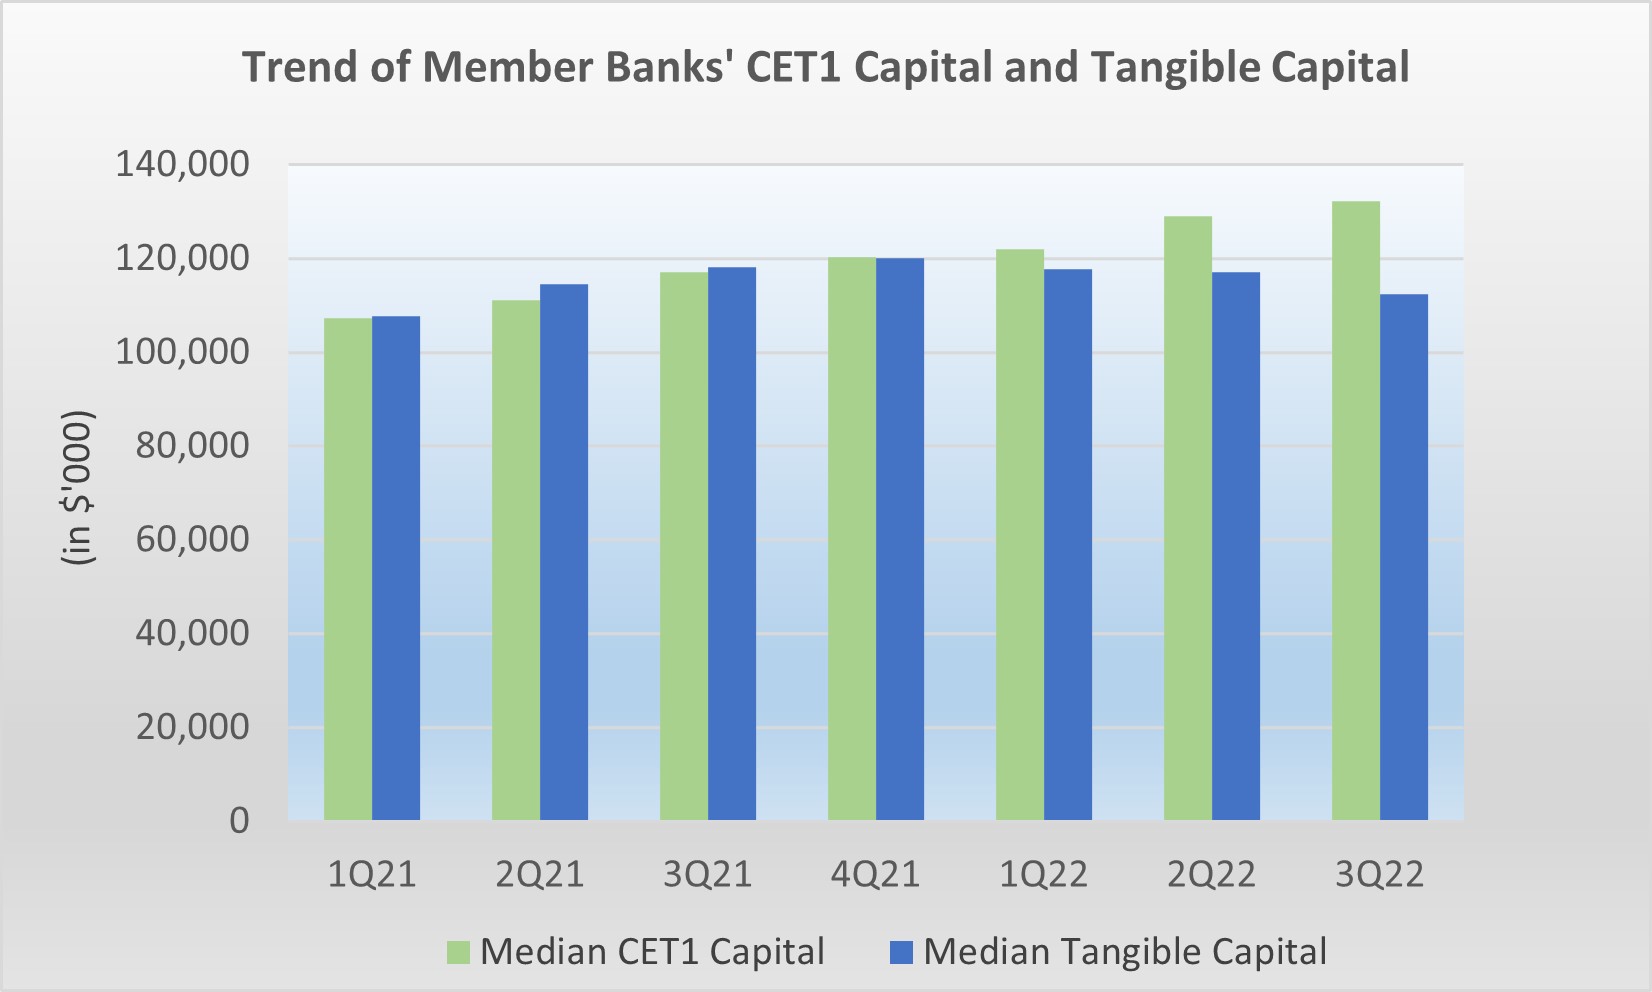 Chart showing trend of Member Banks' CET1 Capital and Tangible Capital